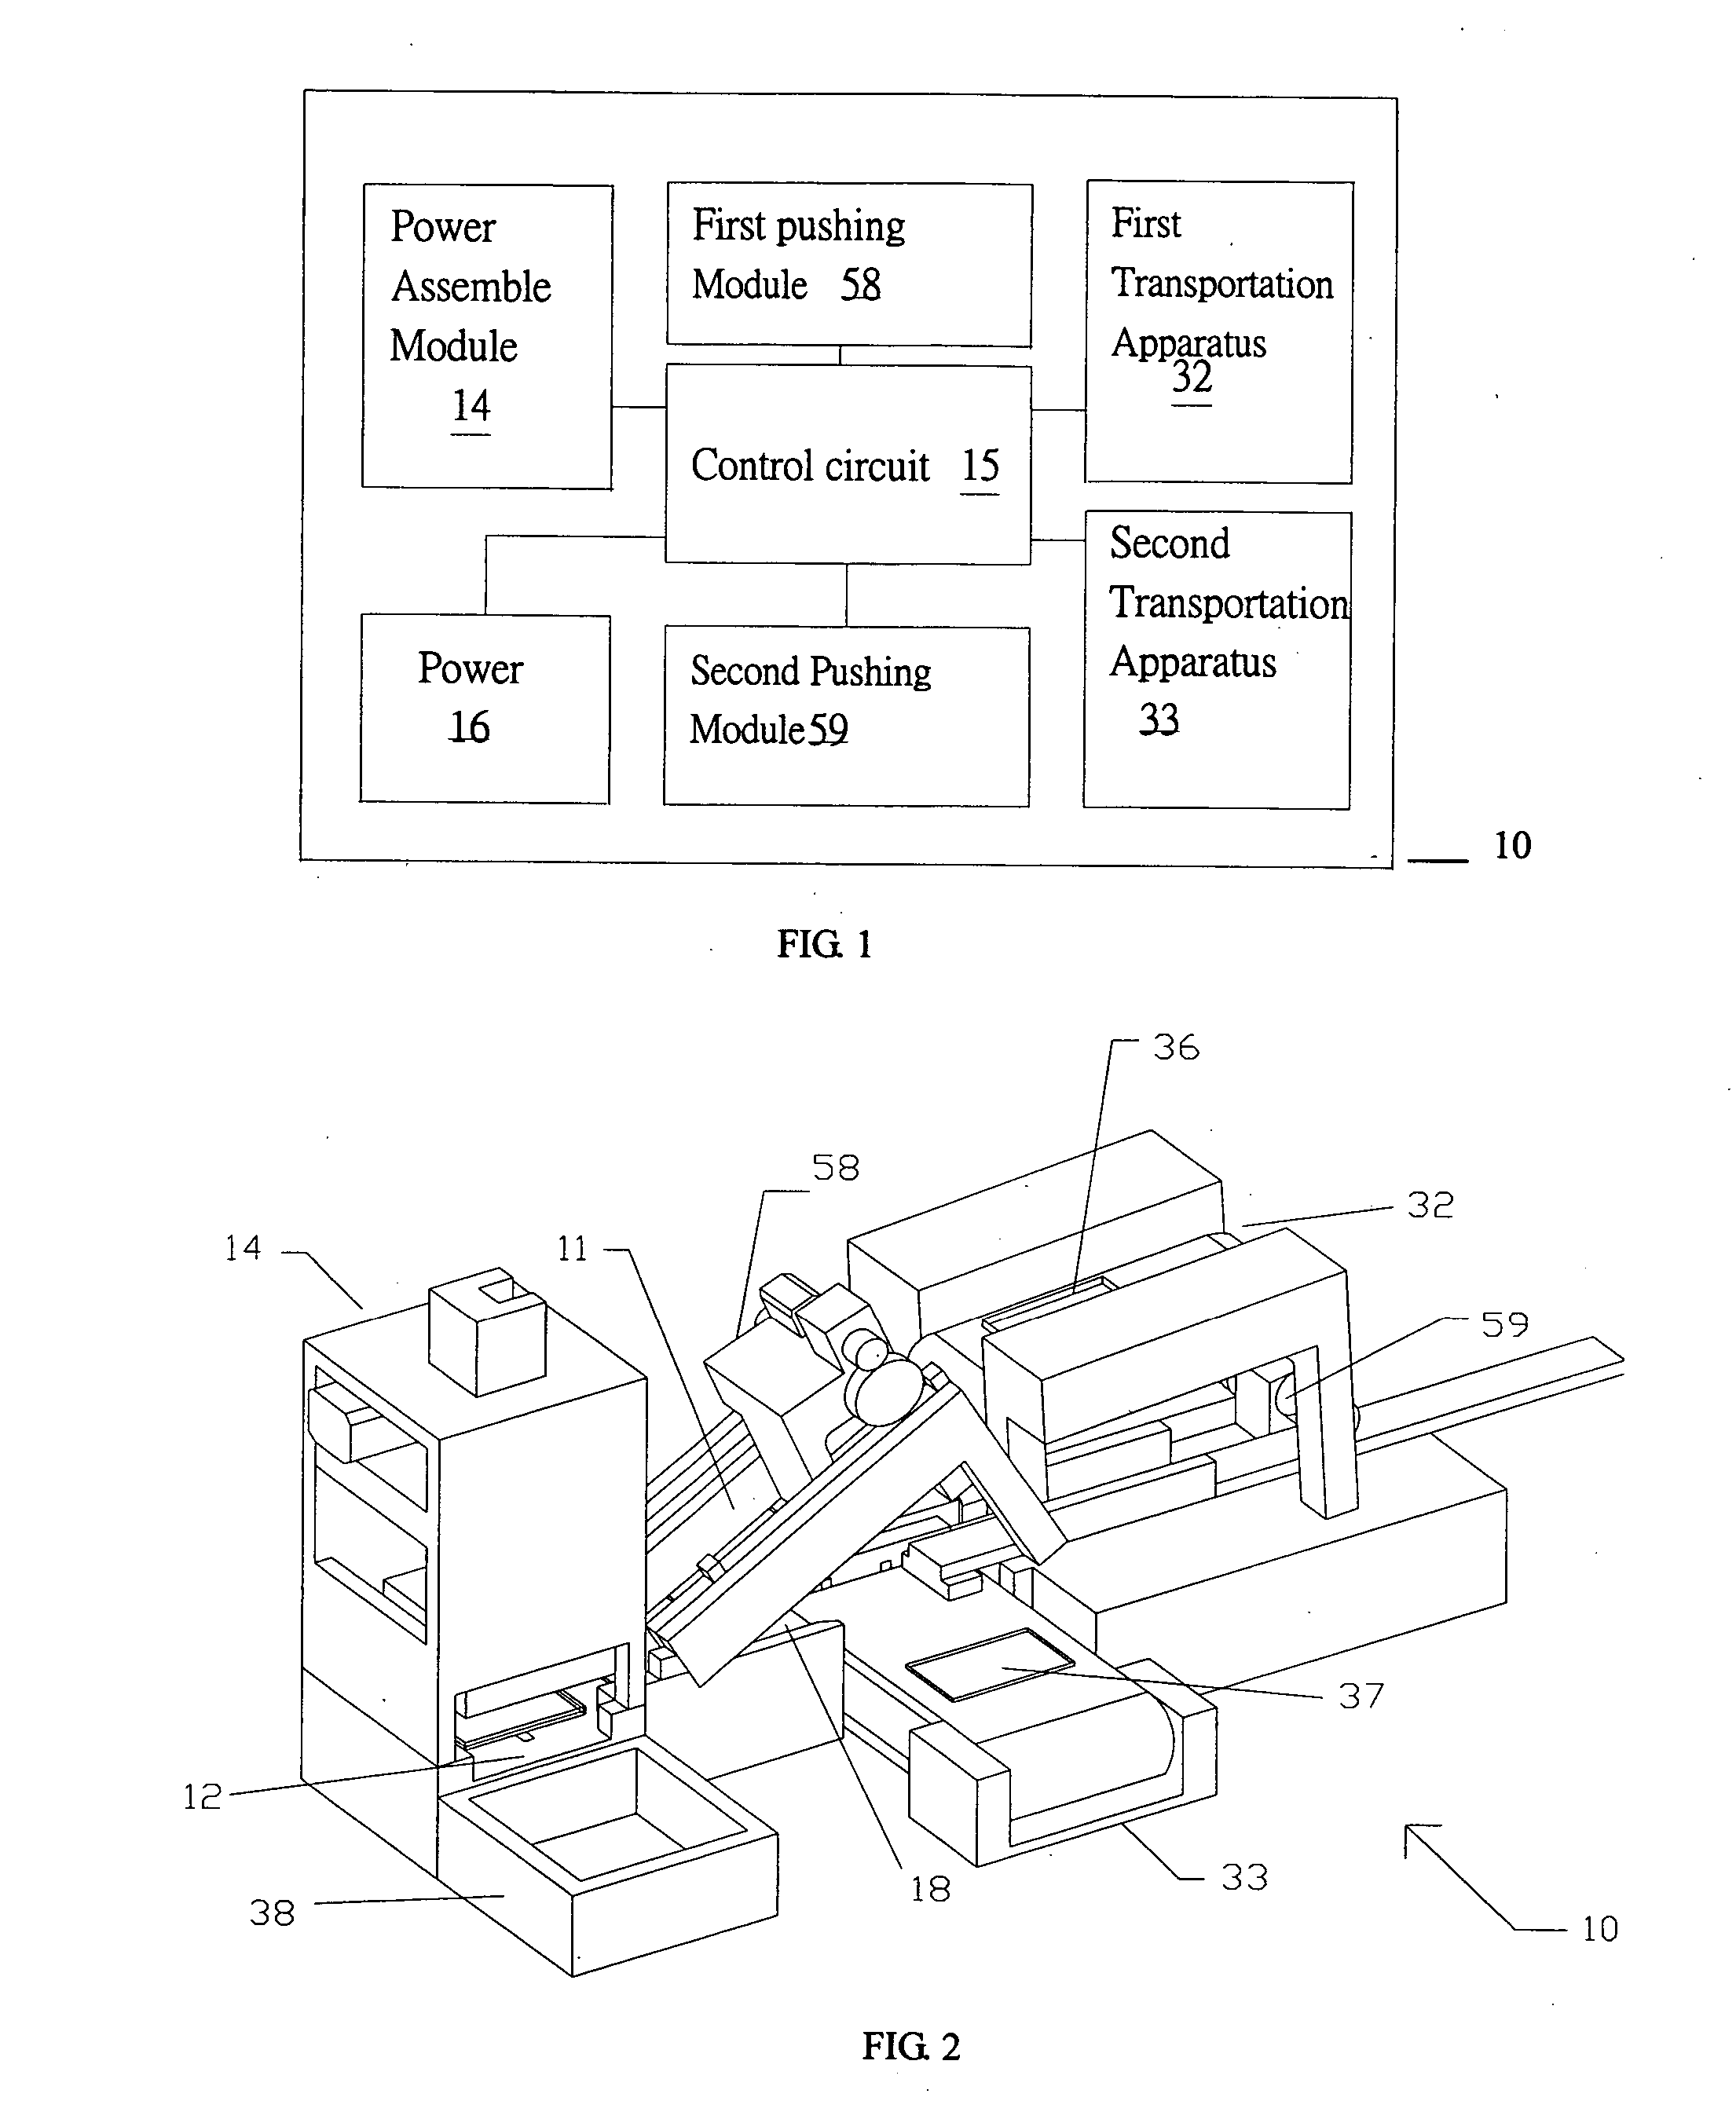 Auto-assembling system for small shell devices